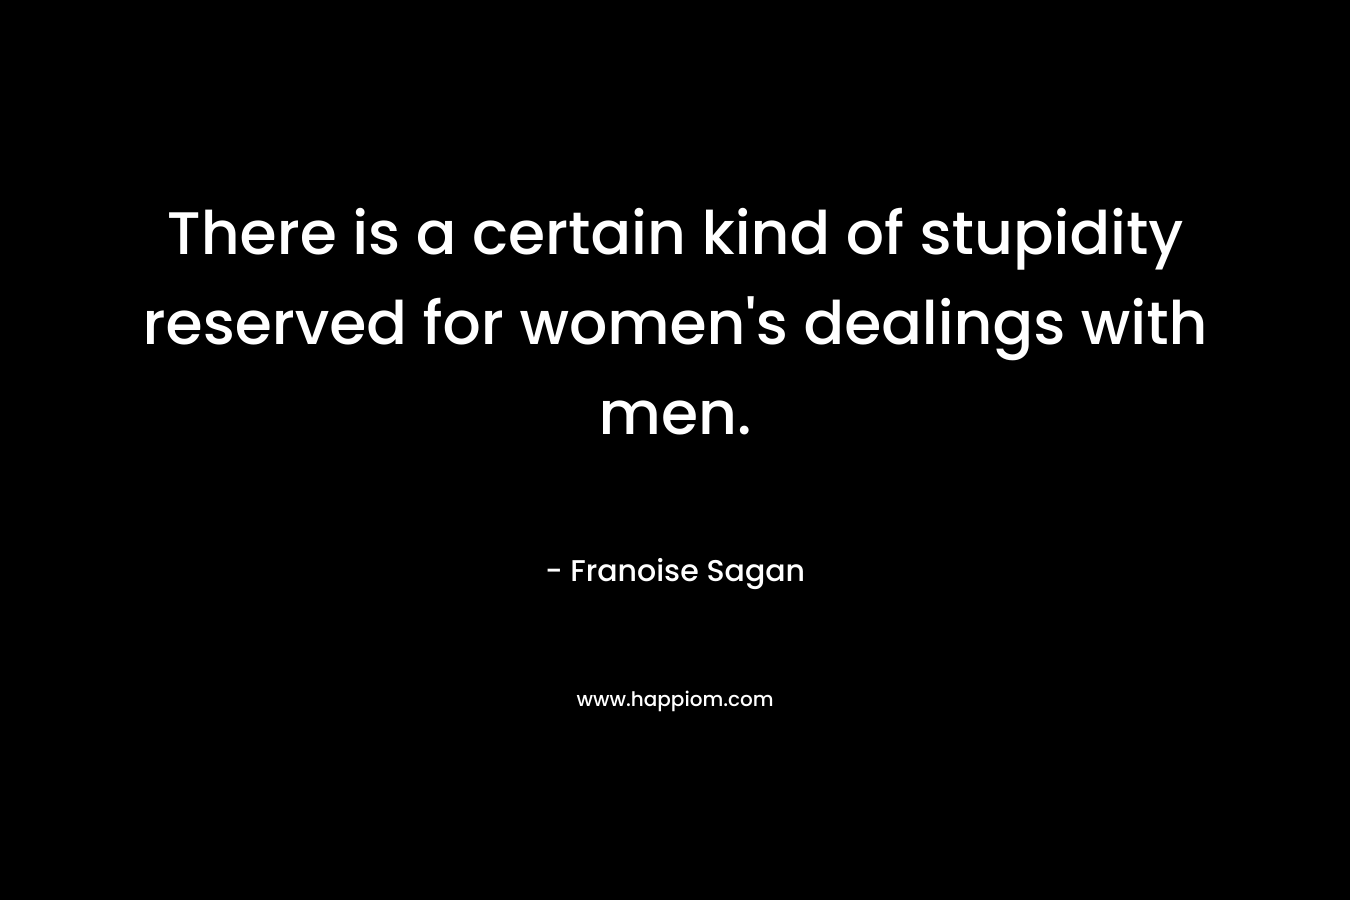 There is a certain kind of stupidity reserved for women’s dealings with men. – Franoise Sagan